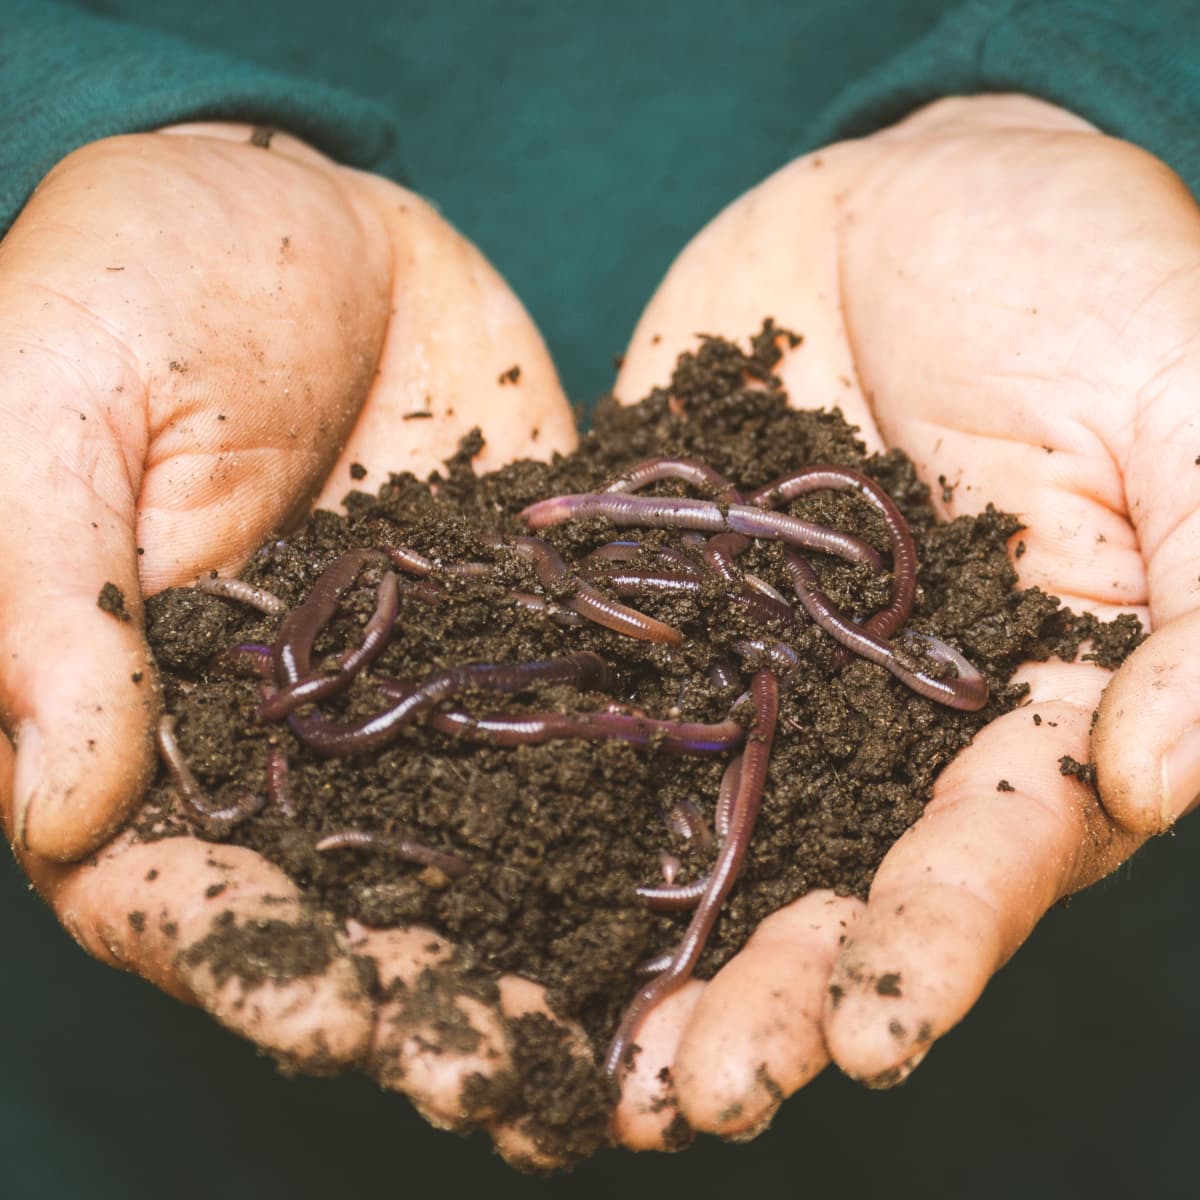 How to catch worm - Animals  Earthworms, Worms, Vermiculture